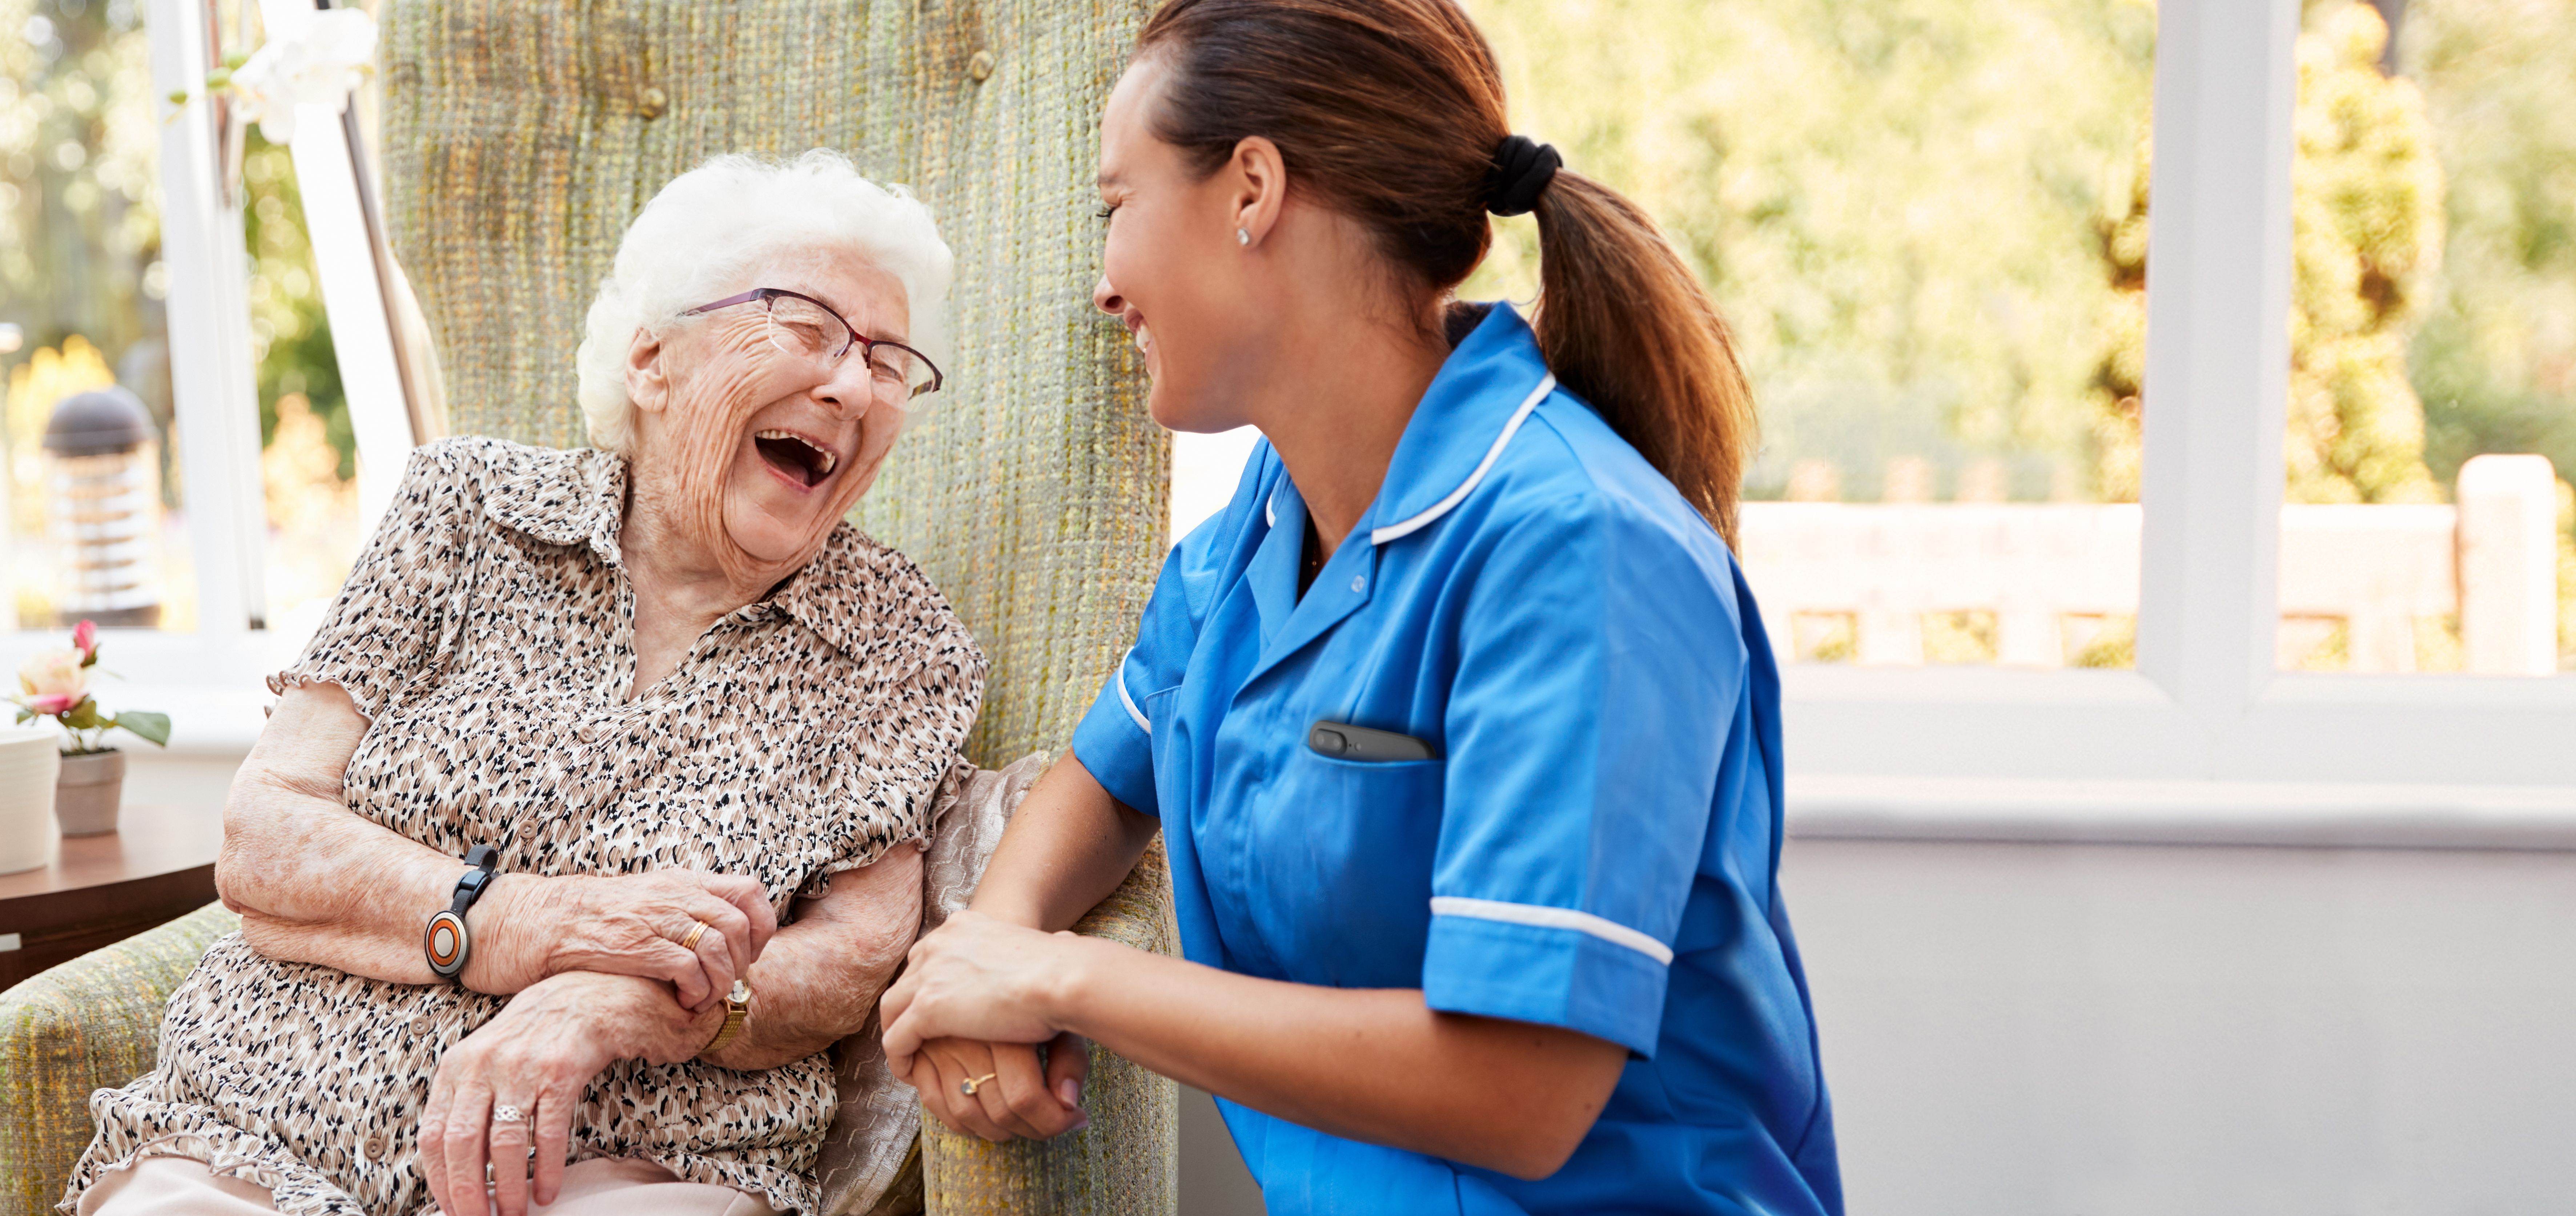 Care homes and COVID – the impact of technology